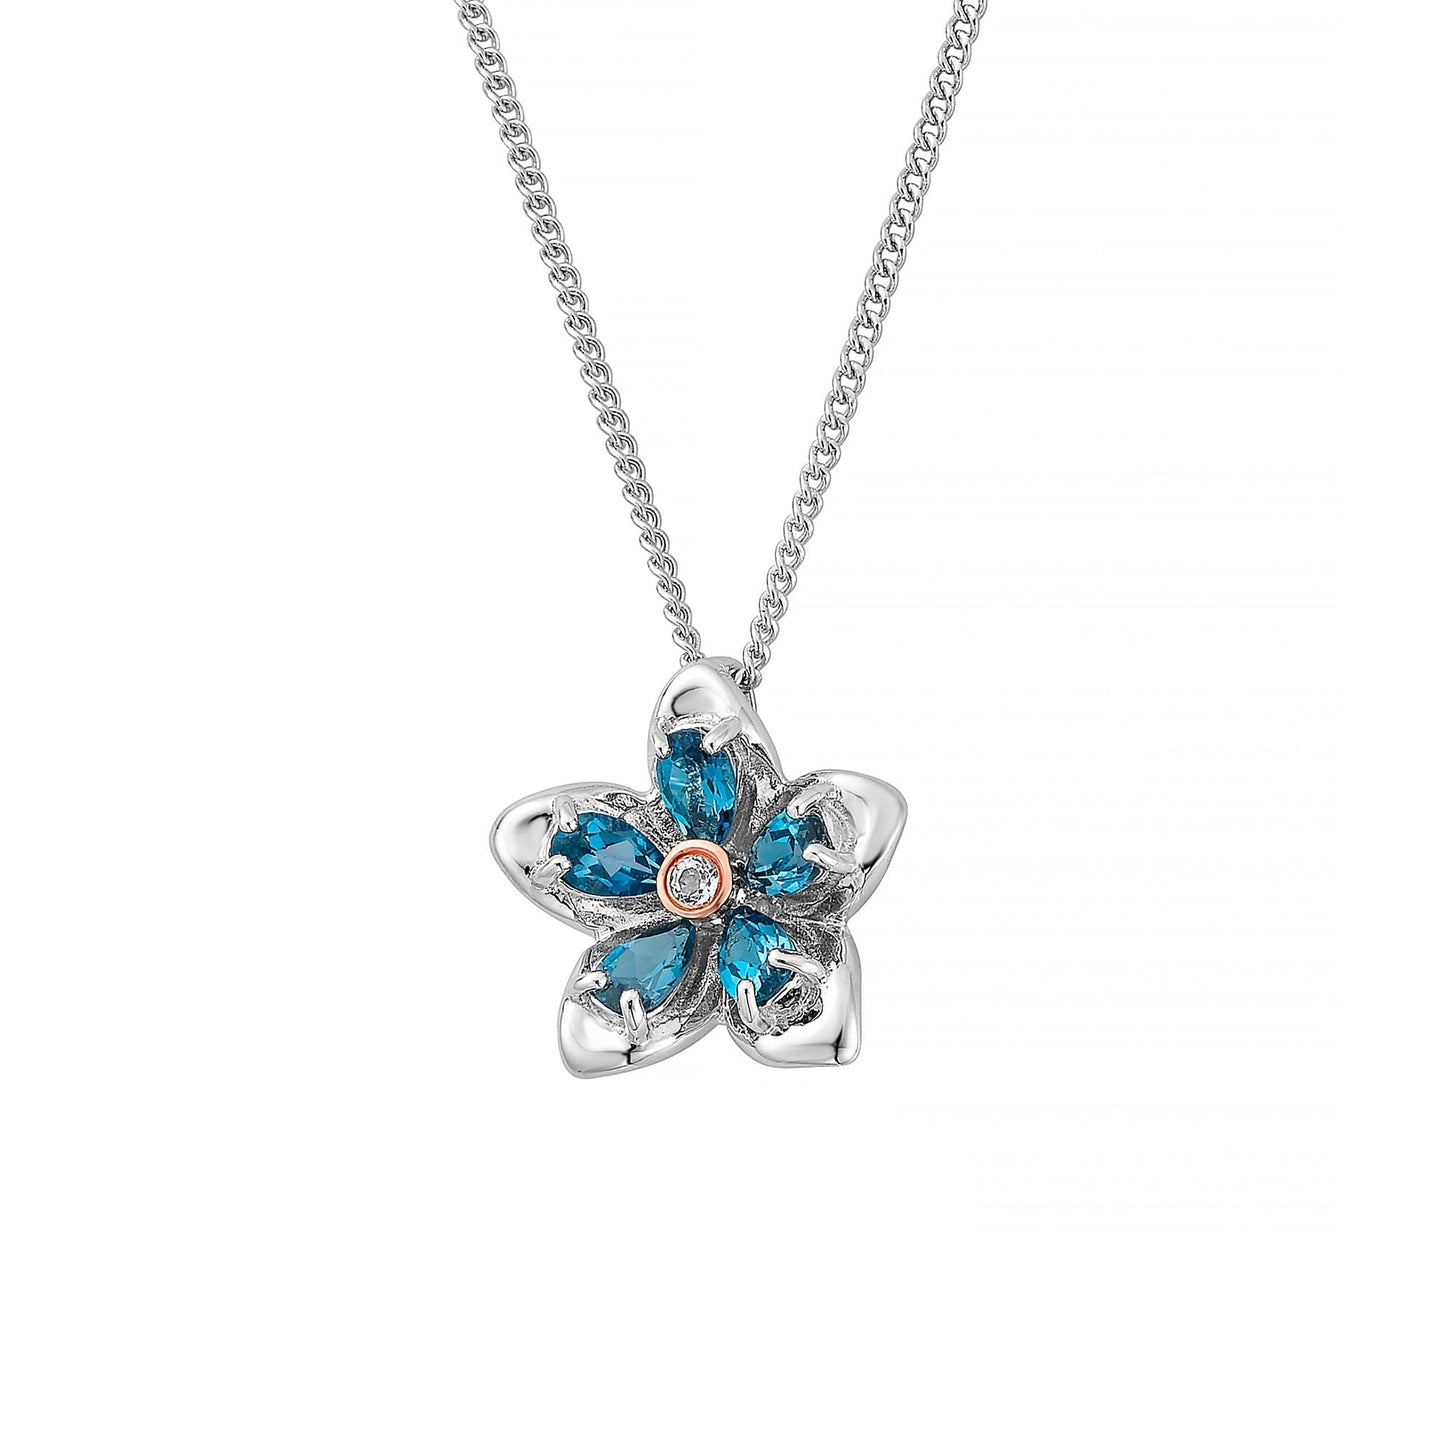 Forget Me Not Silver and London Blue Topaz Pendant